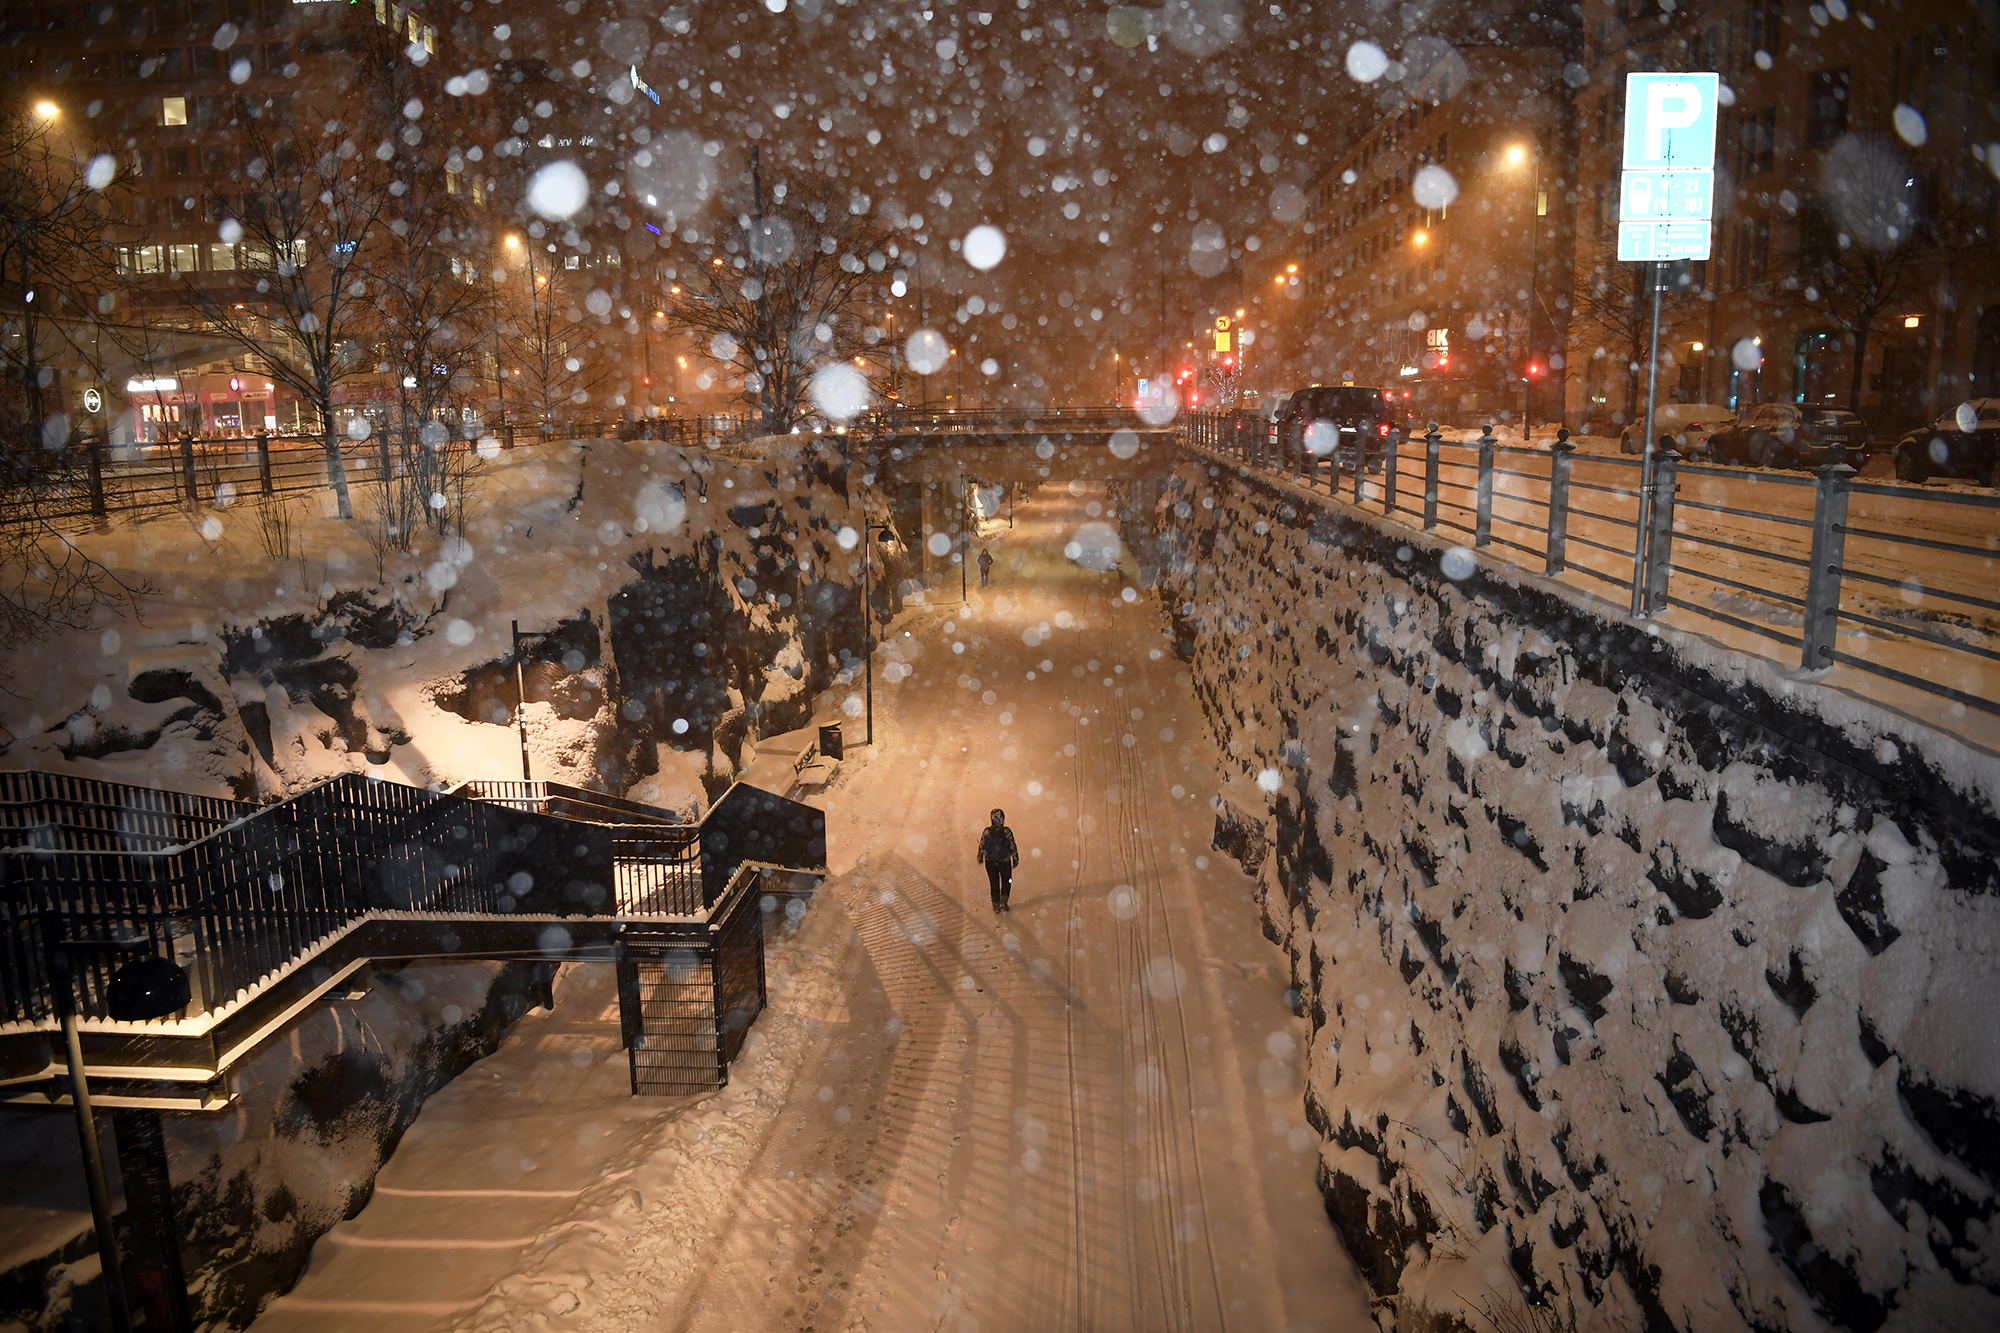 Tuesday's Issues: Blizzard Attacks, Corona Variation Concerns, Feed the Flying Squirrels